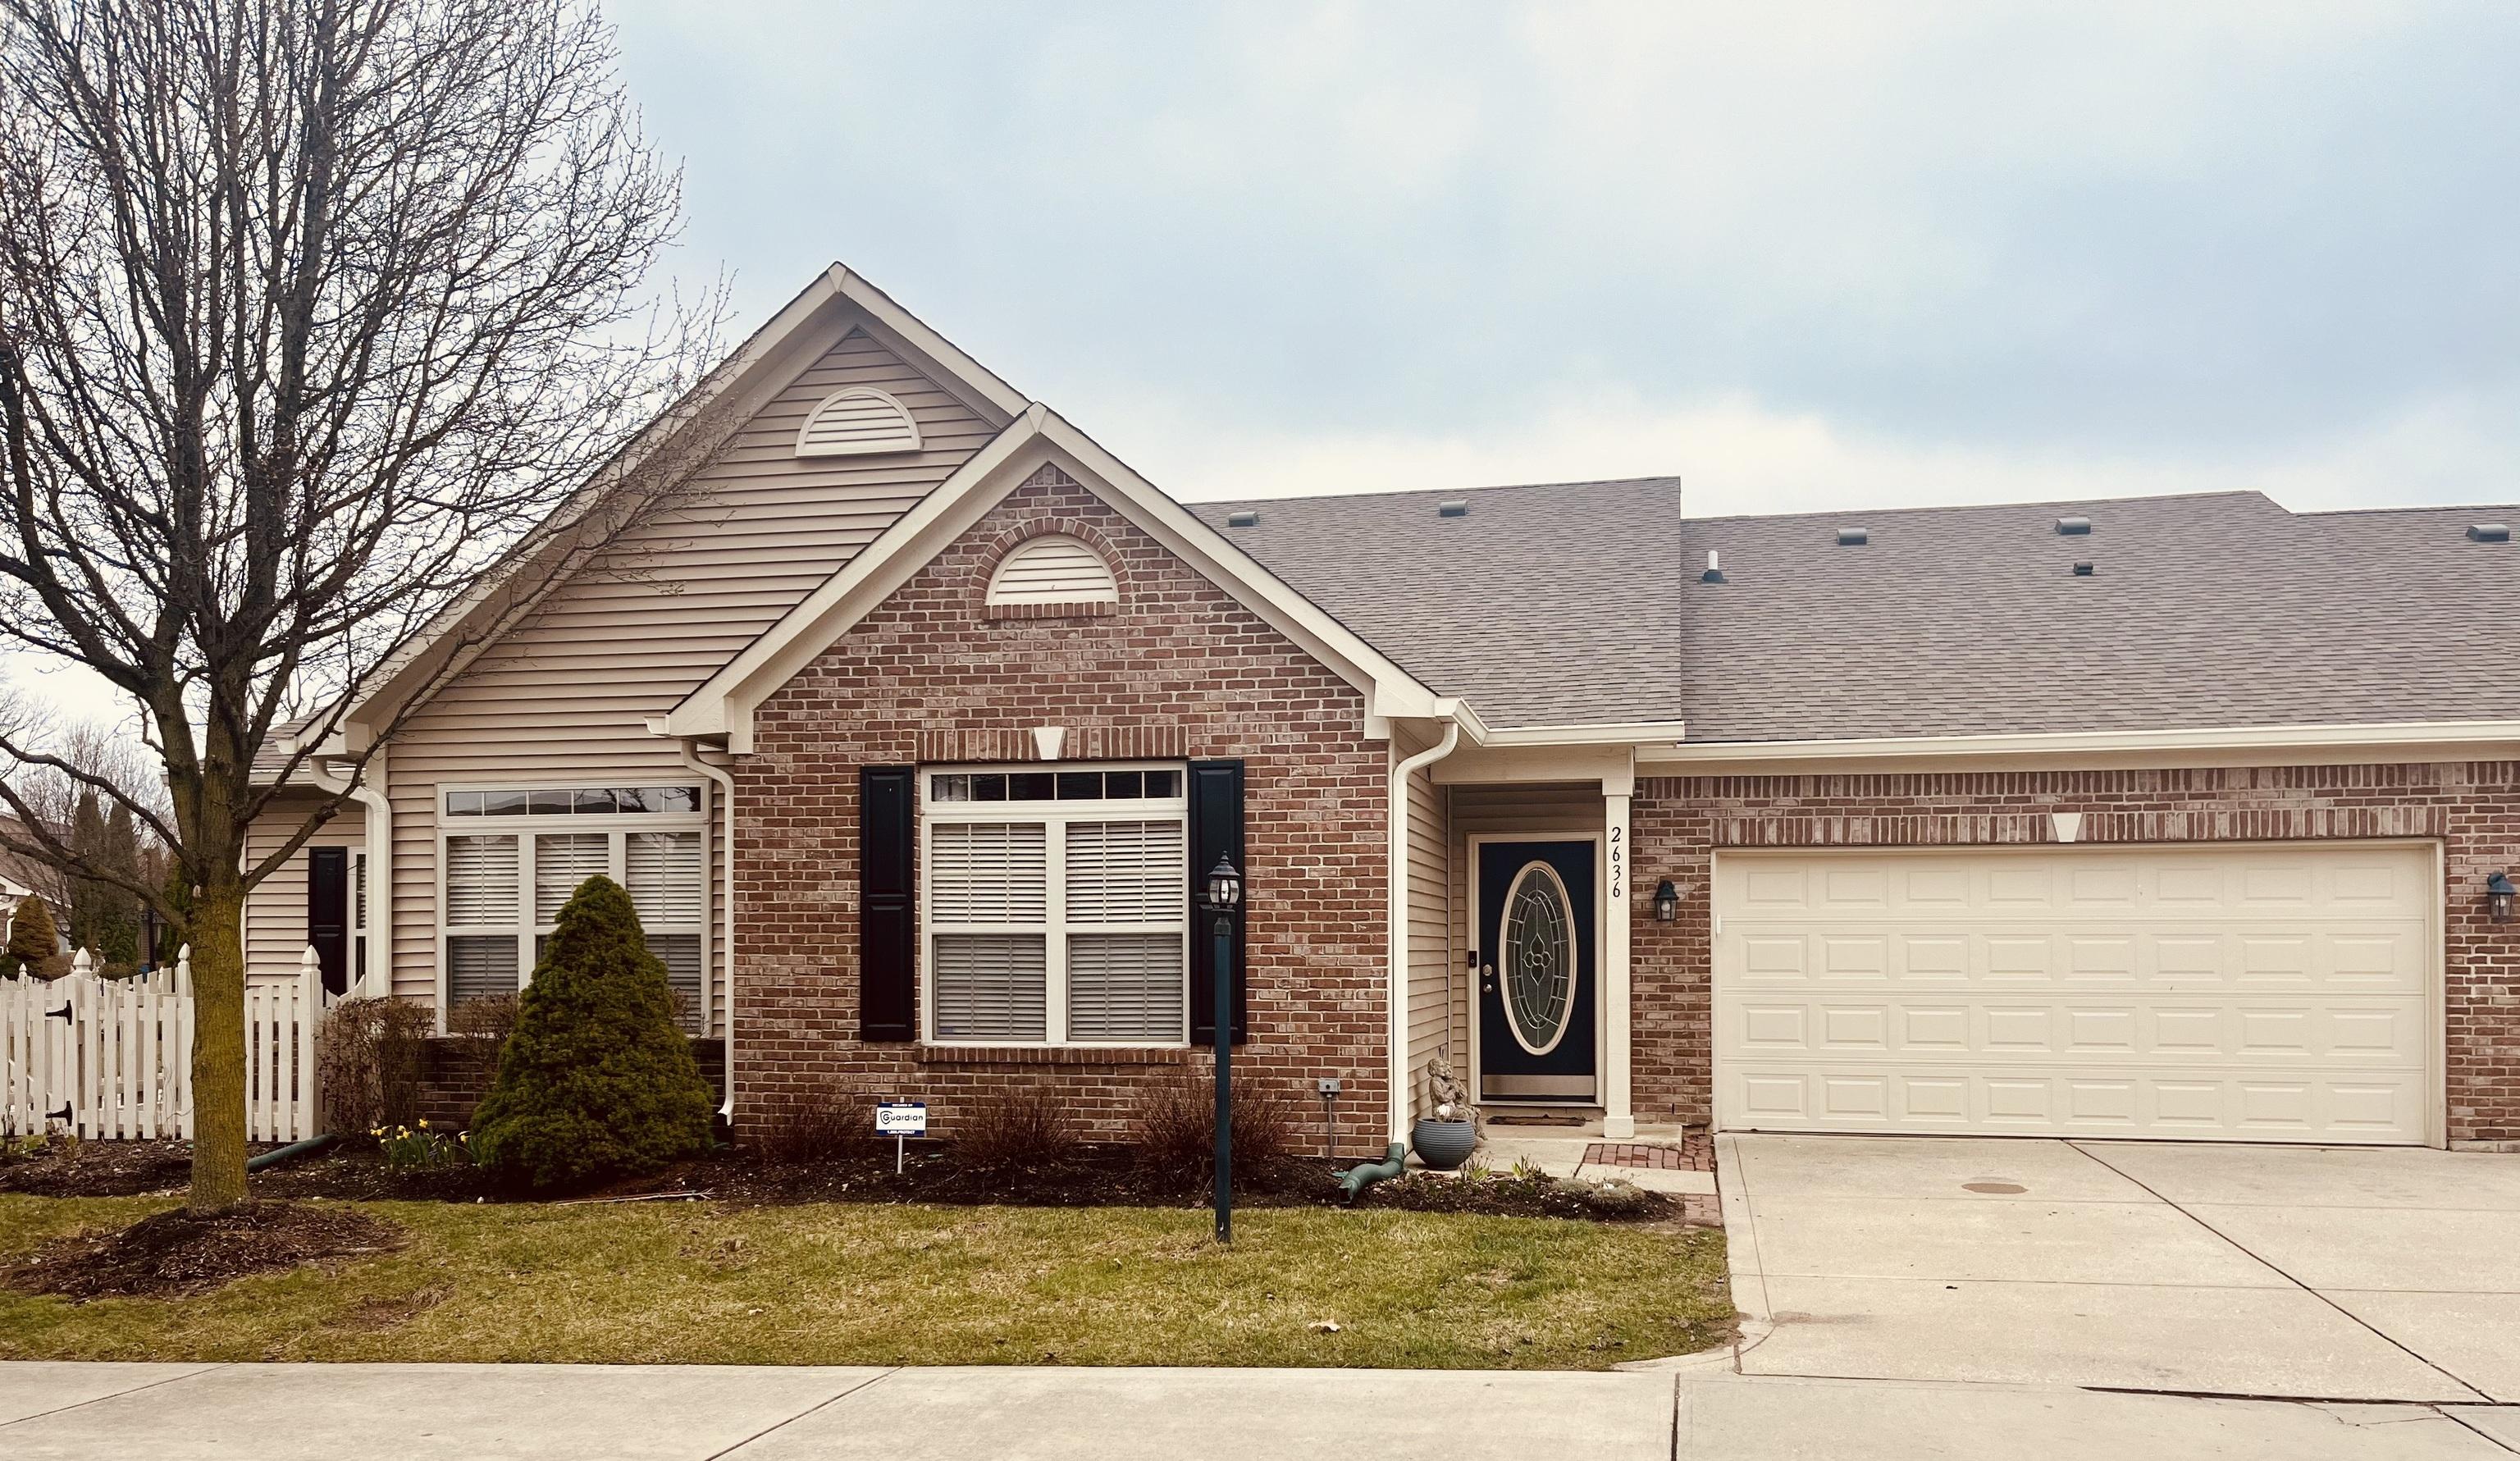 Photo one of 2636 Big Bear Ln Indianapolis IN 46217 | MLS 21967333